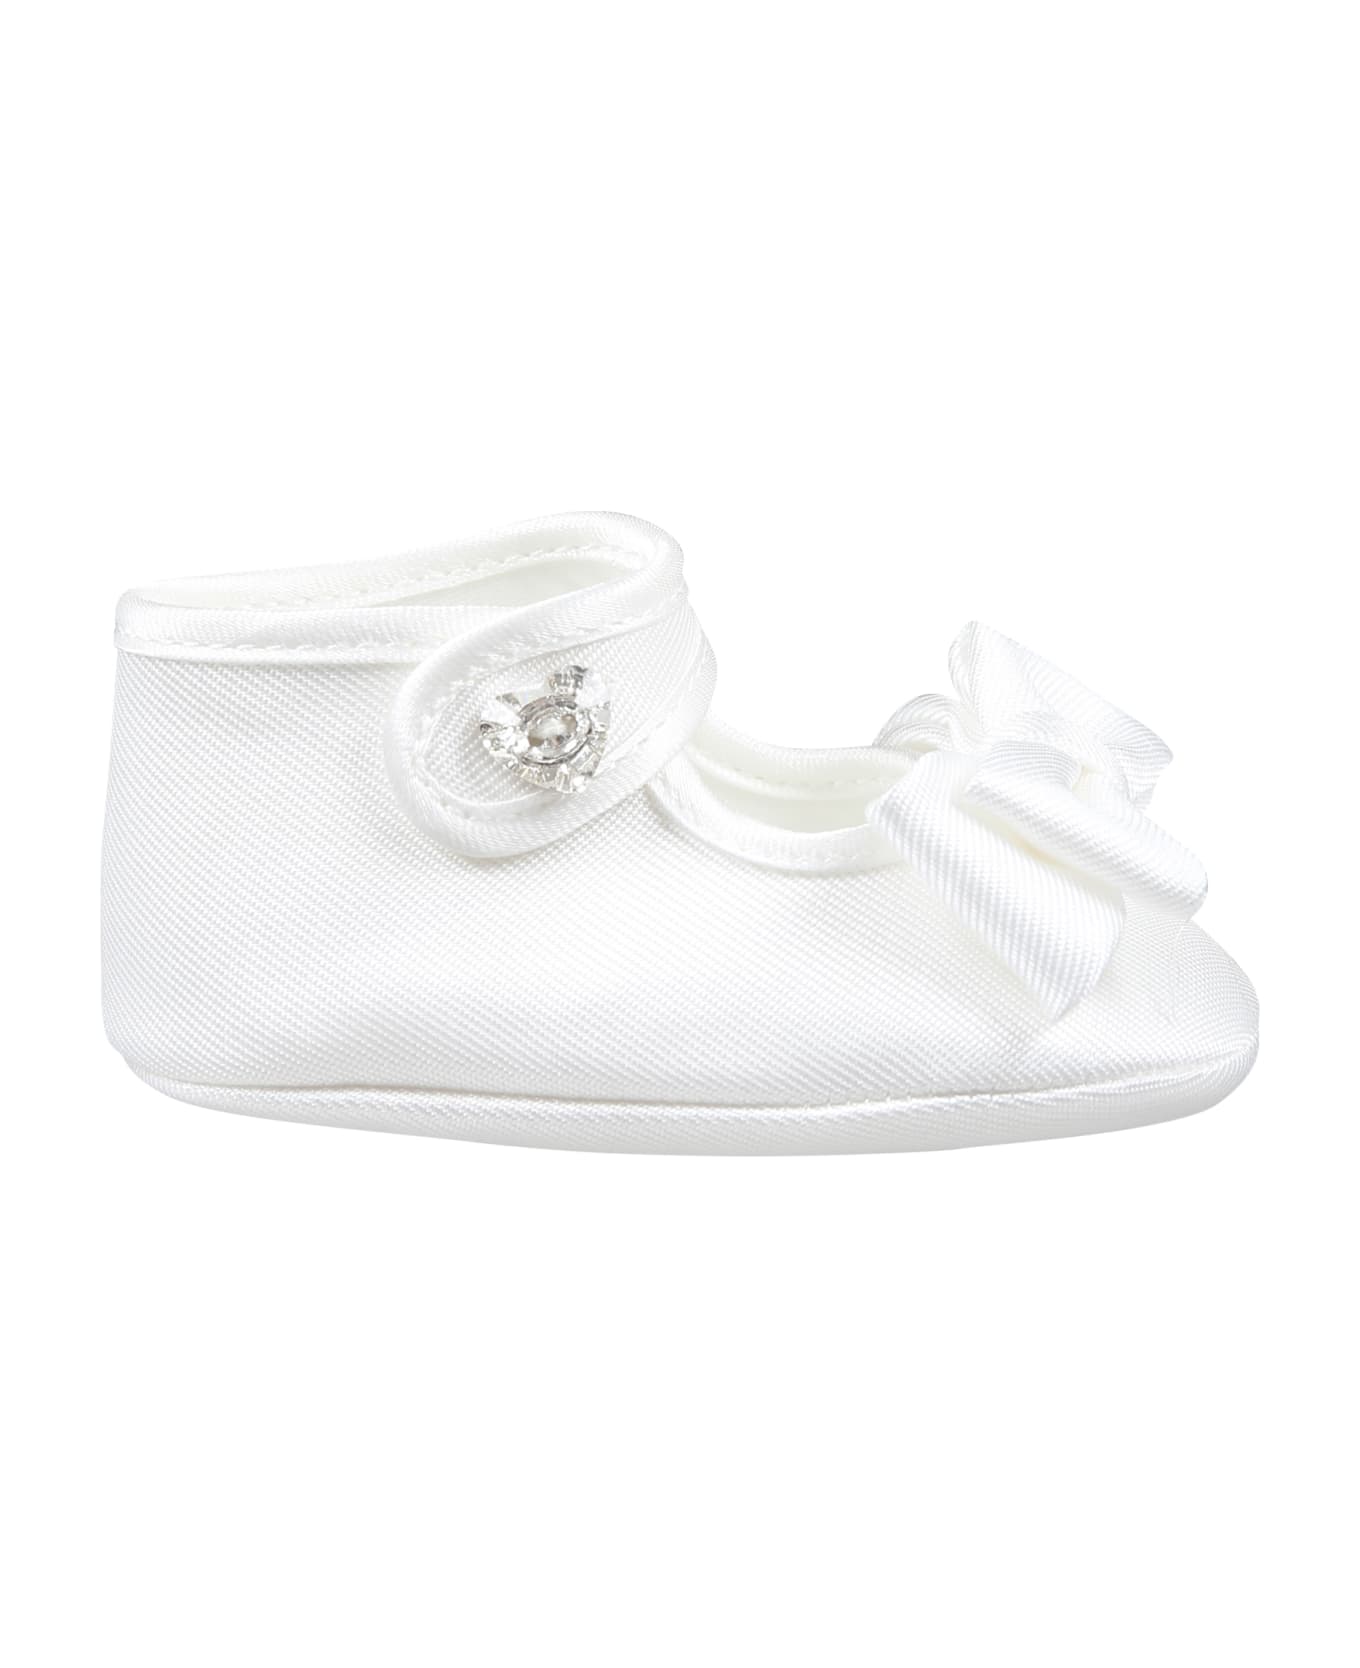 Monnalisa White Flat Shoes For Baby Girl With Bow - White シューズ